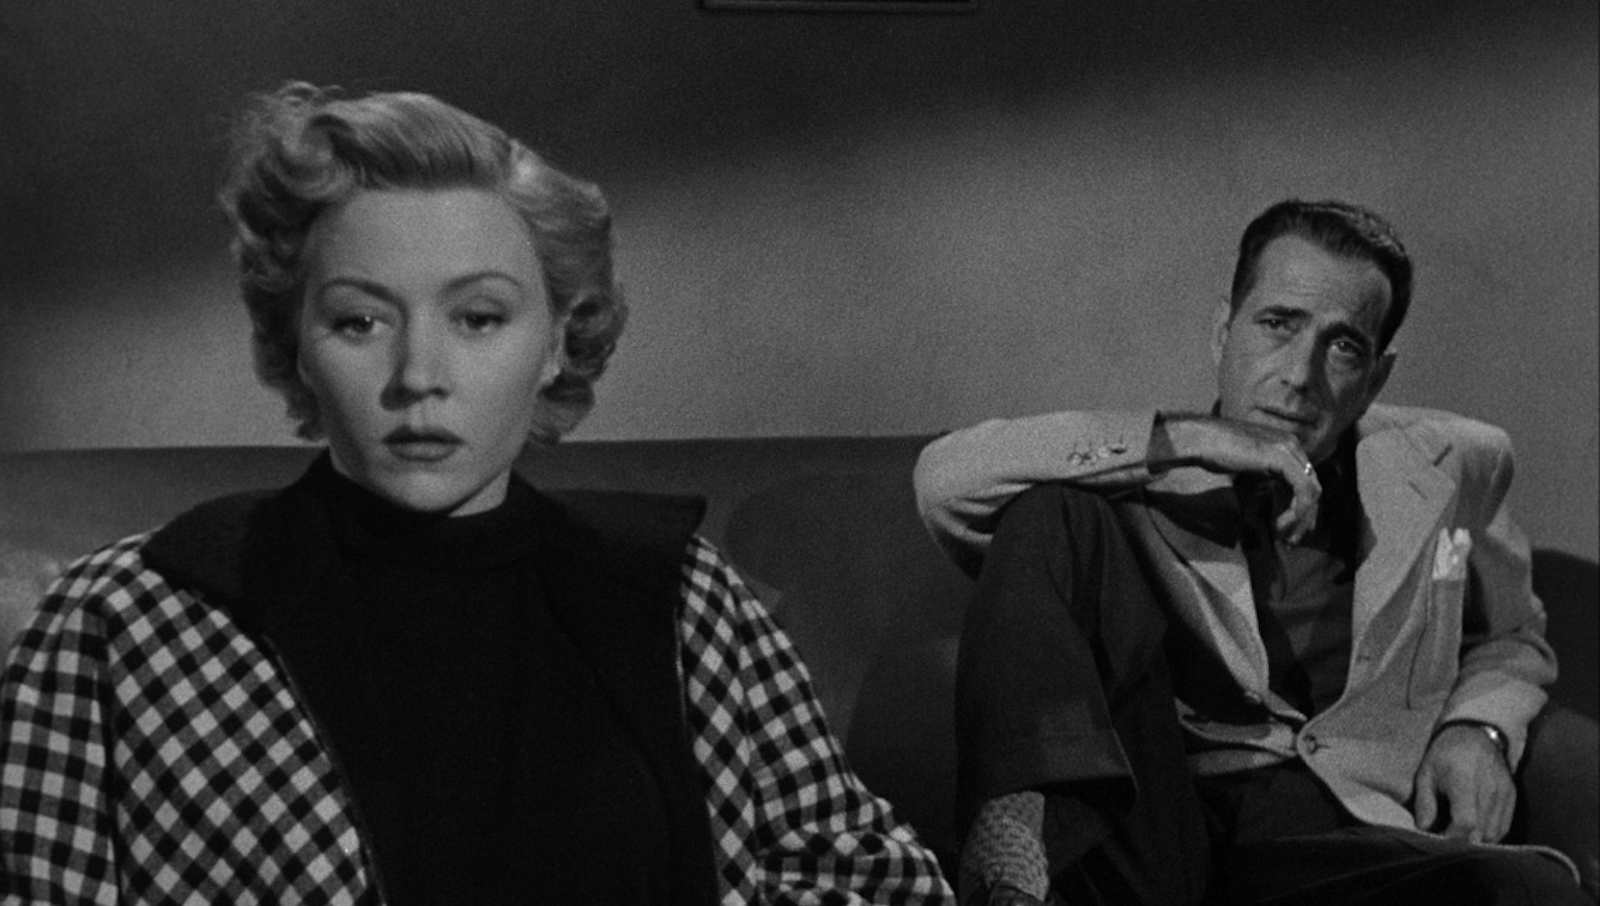 A woman in the foreground looks off screen concerned, while a man sits behind her on the same couch looking at her